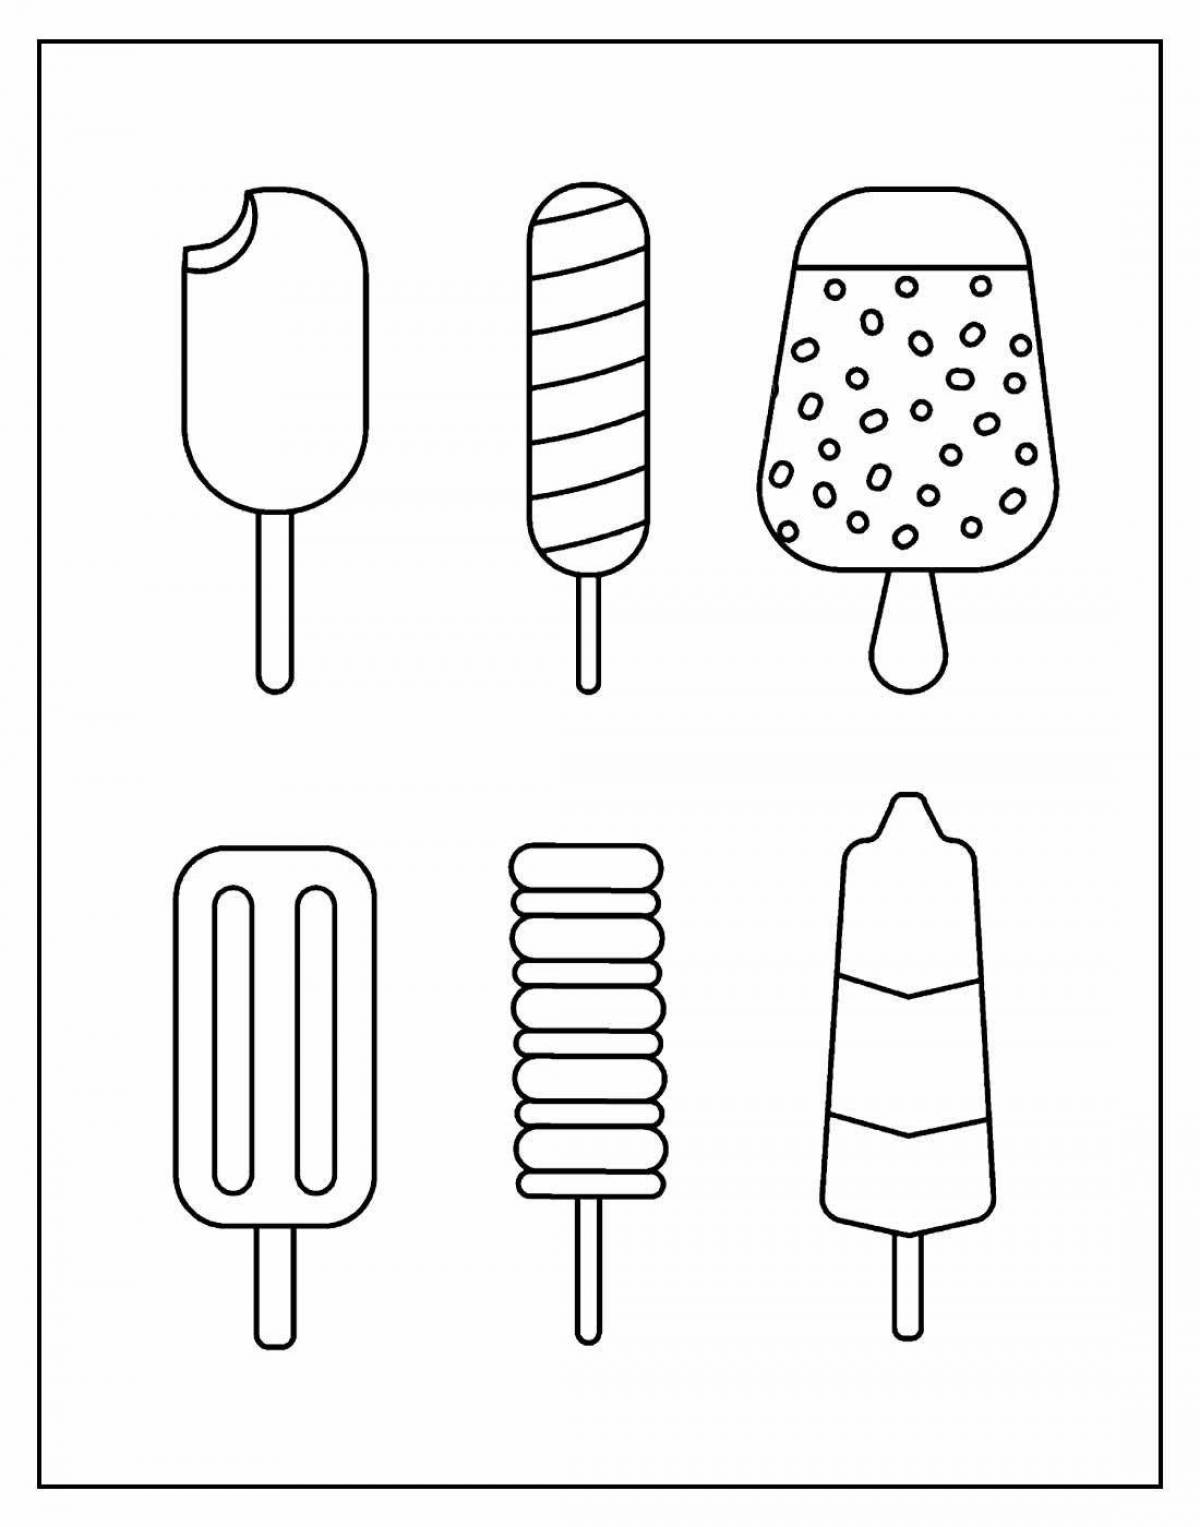 Fun ice popsicle coloring page